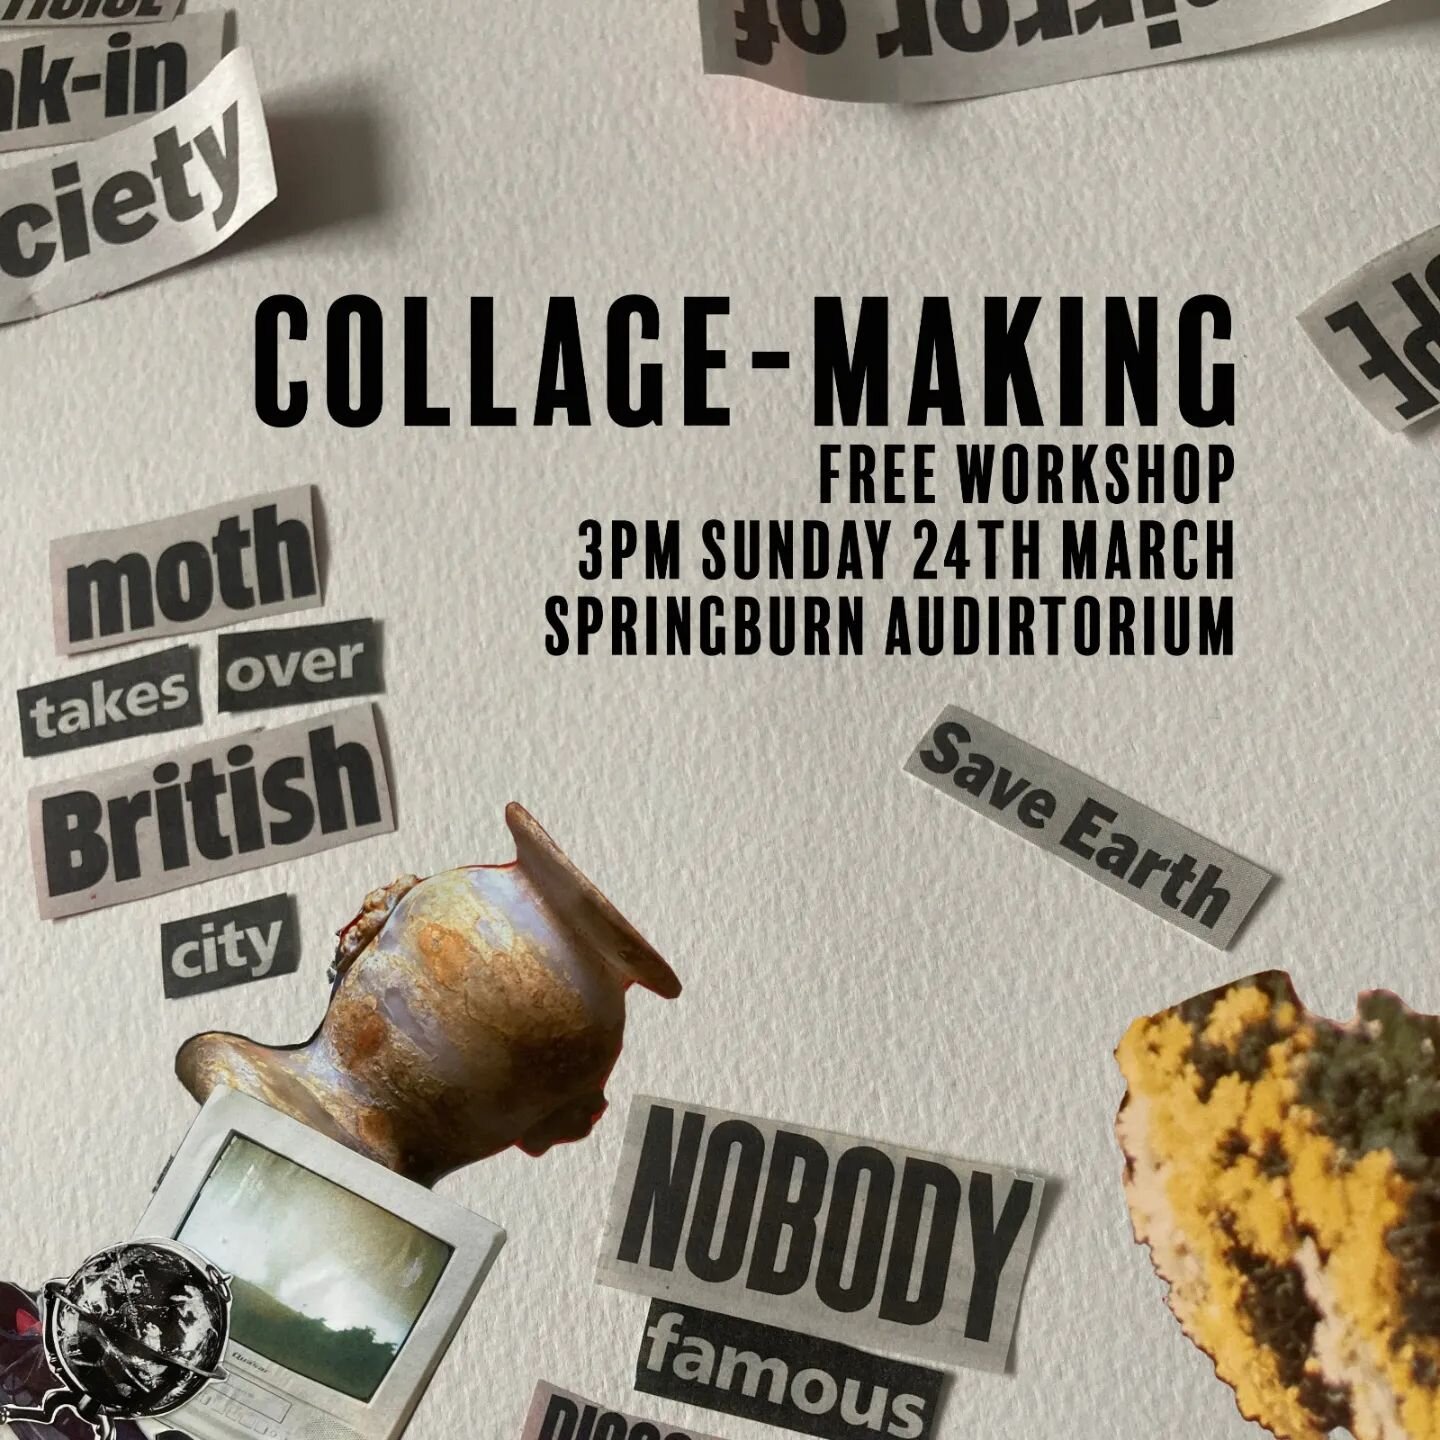 This Sunday, come along and get involved in some collage-making. Collage is a creative art form that allows you to experiment with combining different materials, forms, and sources and can express ideas and themes that may be beyond words.

The free 